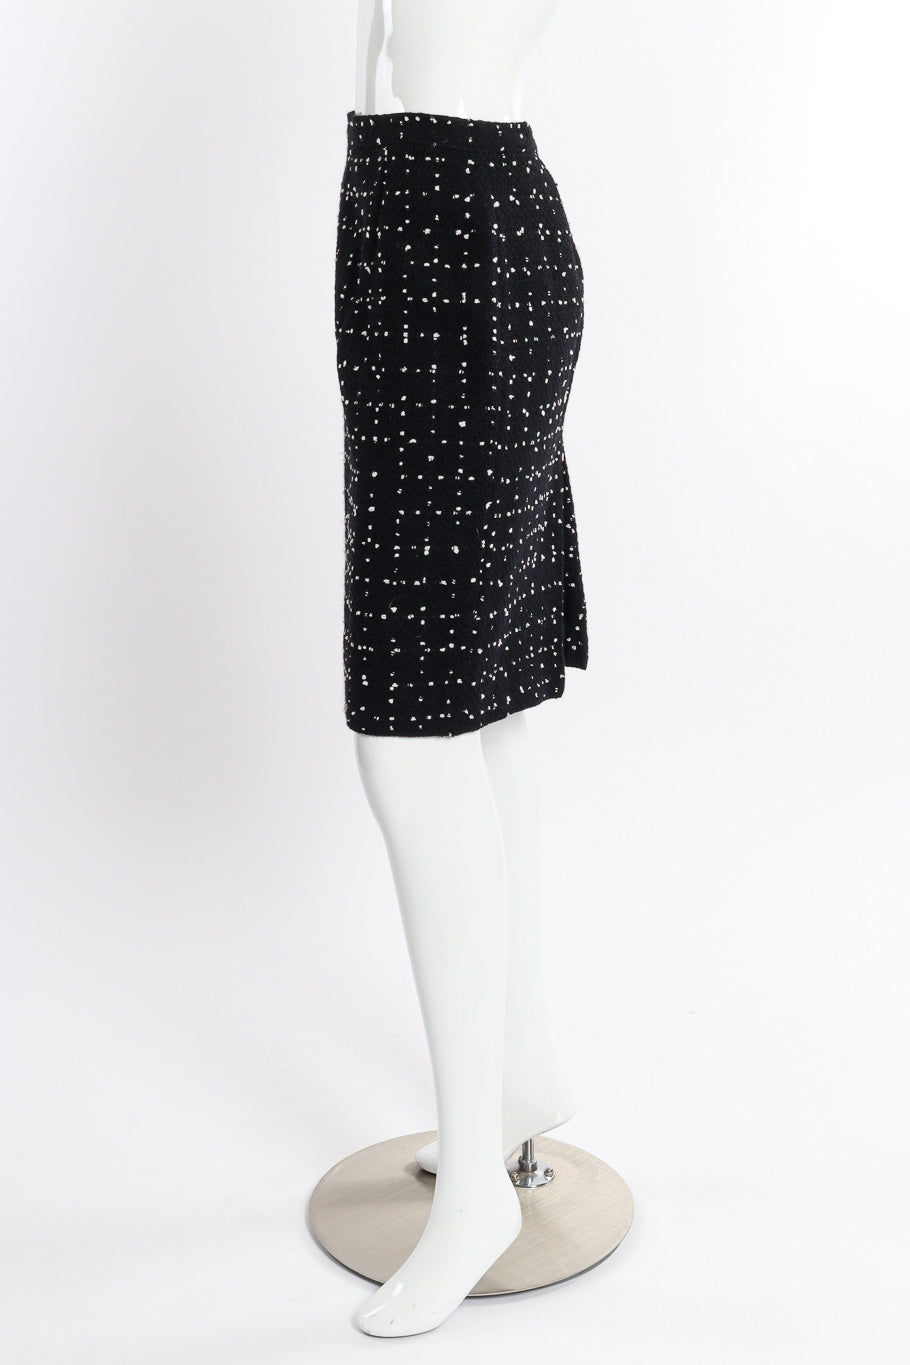 Vintage Moschino Dot Bouclé Jacket and Skirt Set skirt side view on mannequin @recessla